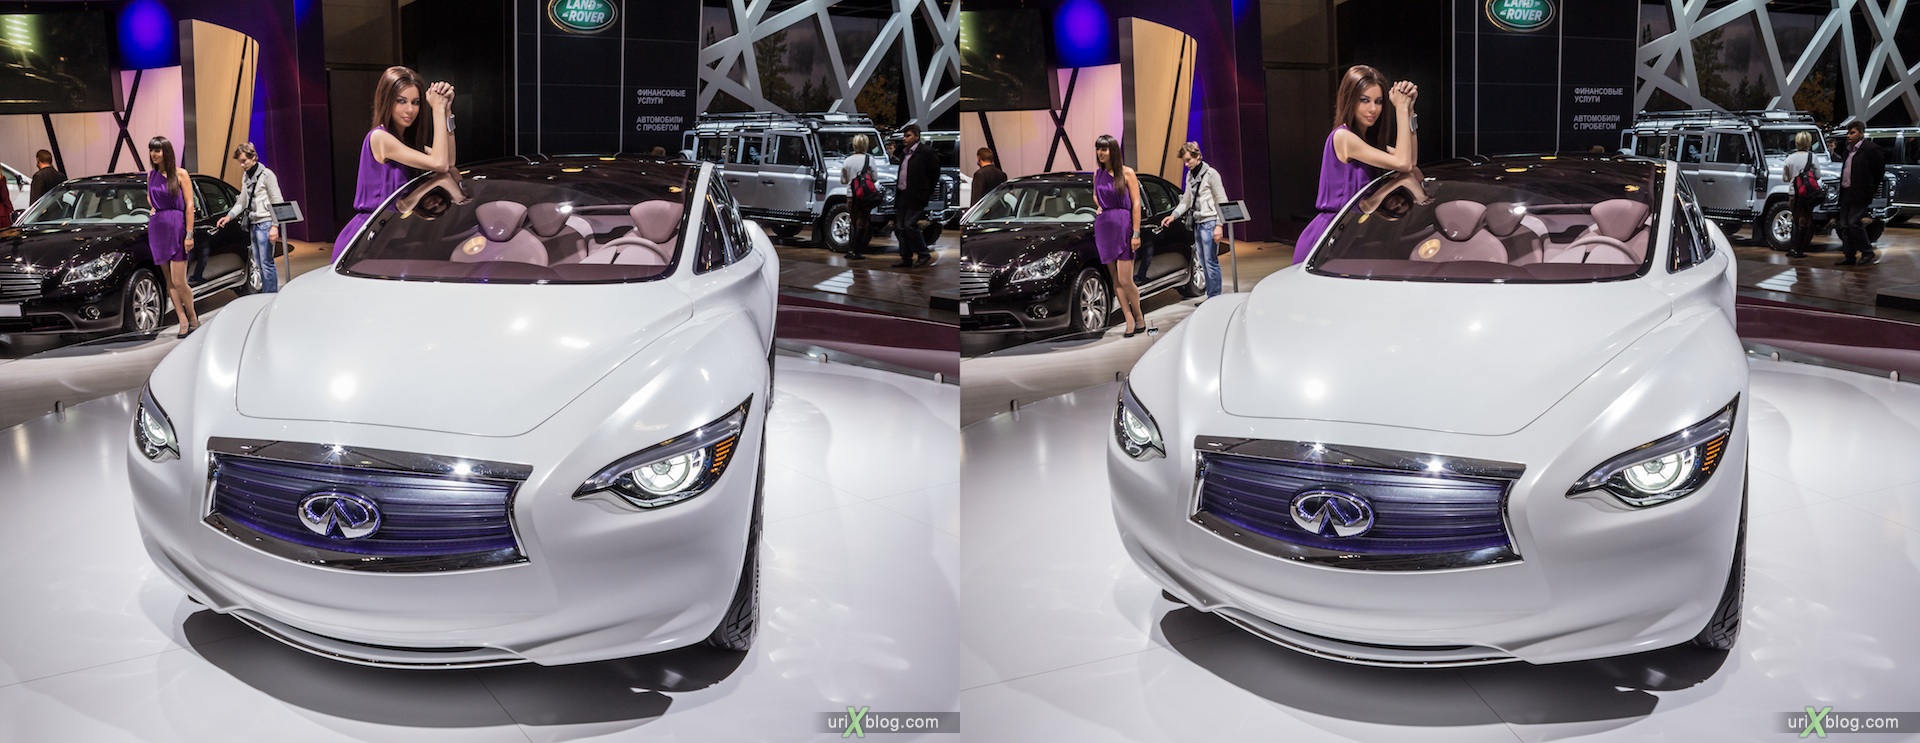 2012, Moscow International Automobile Salon, auto show, 3D, stereo pair, cross-eyed, crossview